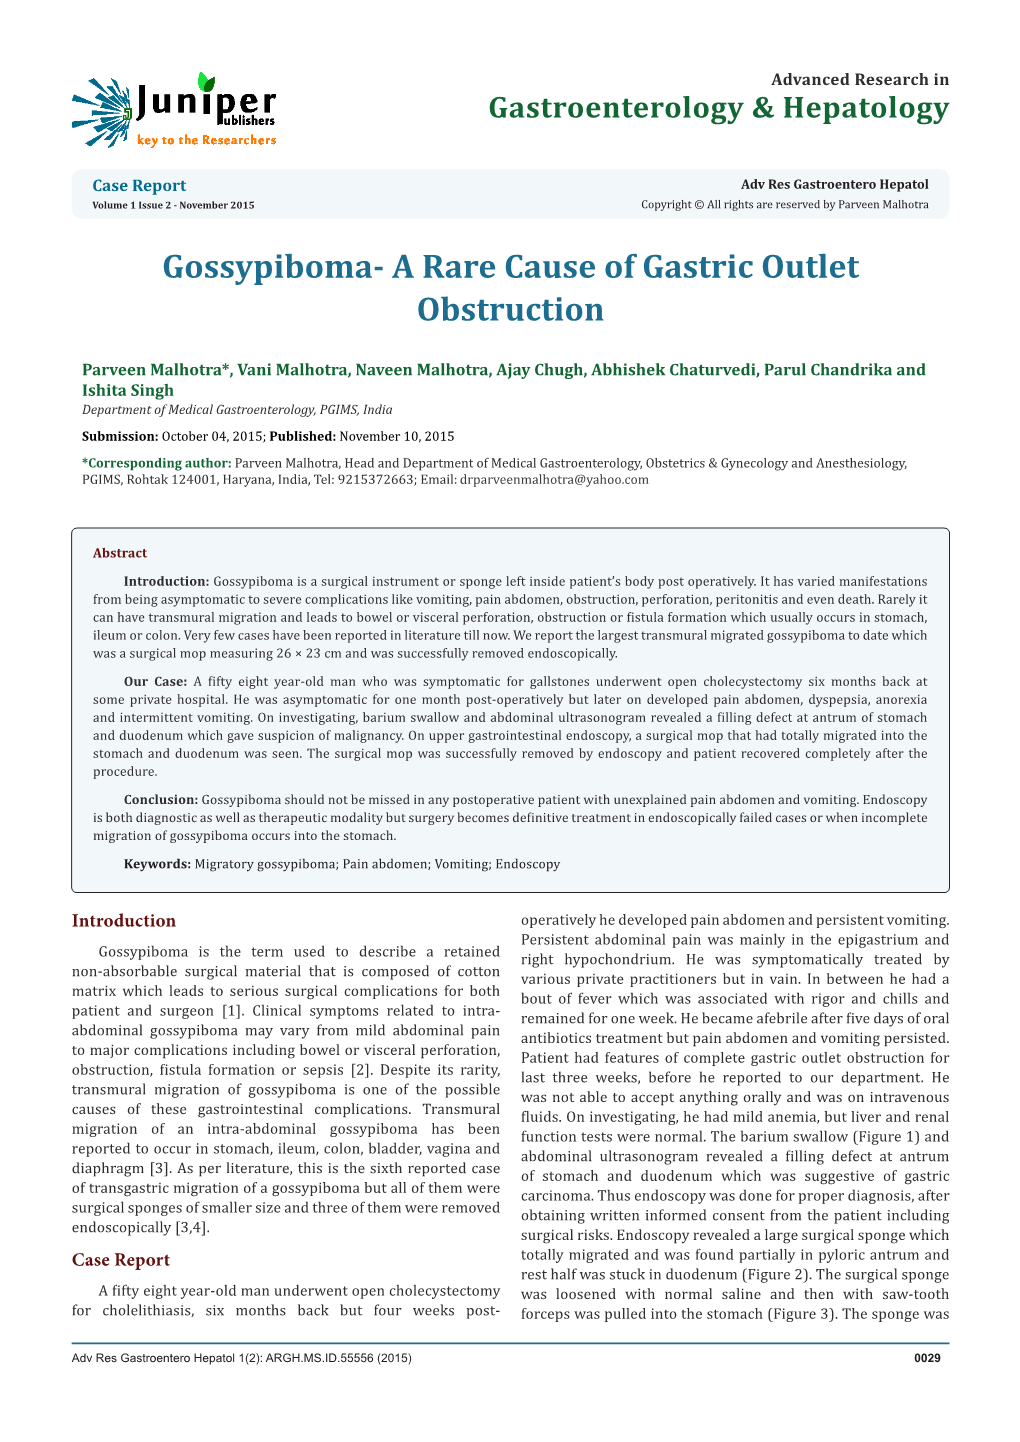 Gossypiboma- a Rare Cause of Gastric Outlet Obstruction